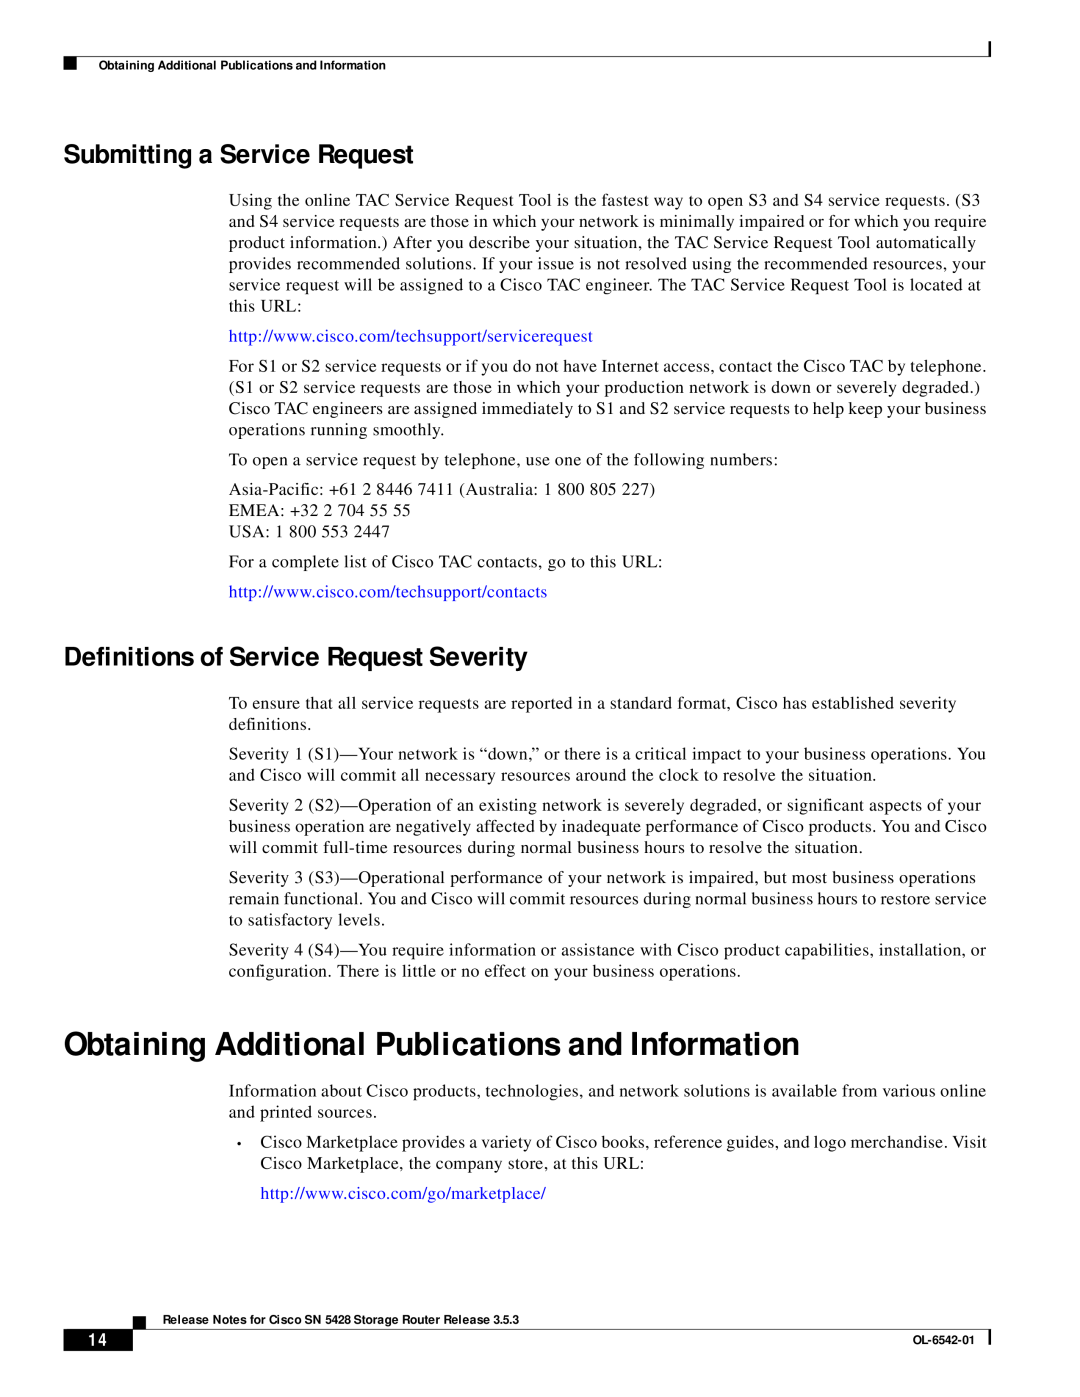 Cisco Systems SN 5428 manual Obtaining Additional Publications and Information, Submitting a Service Request 